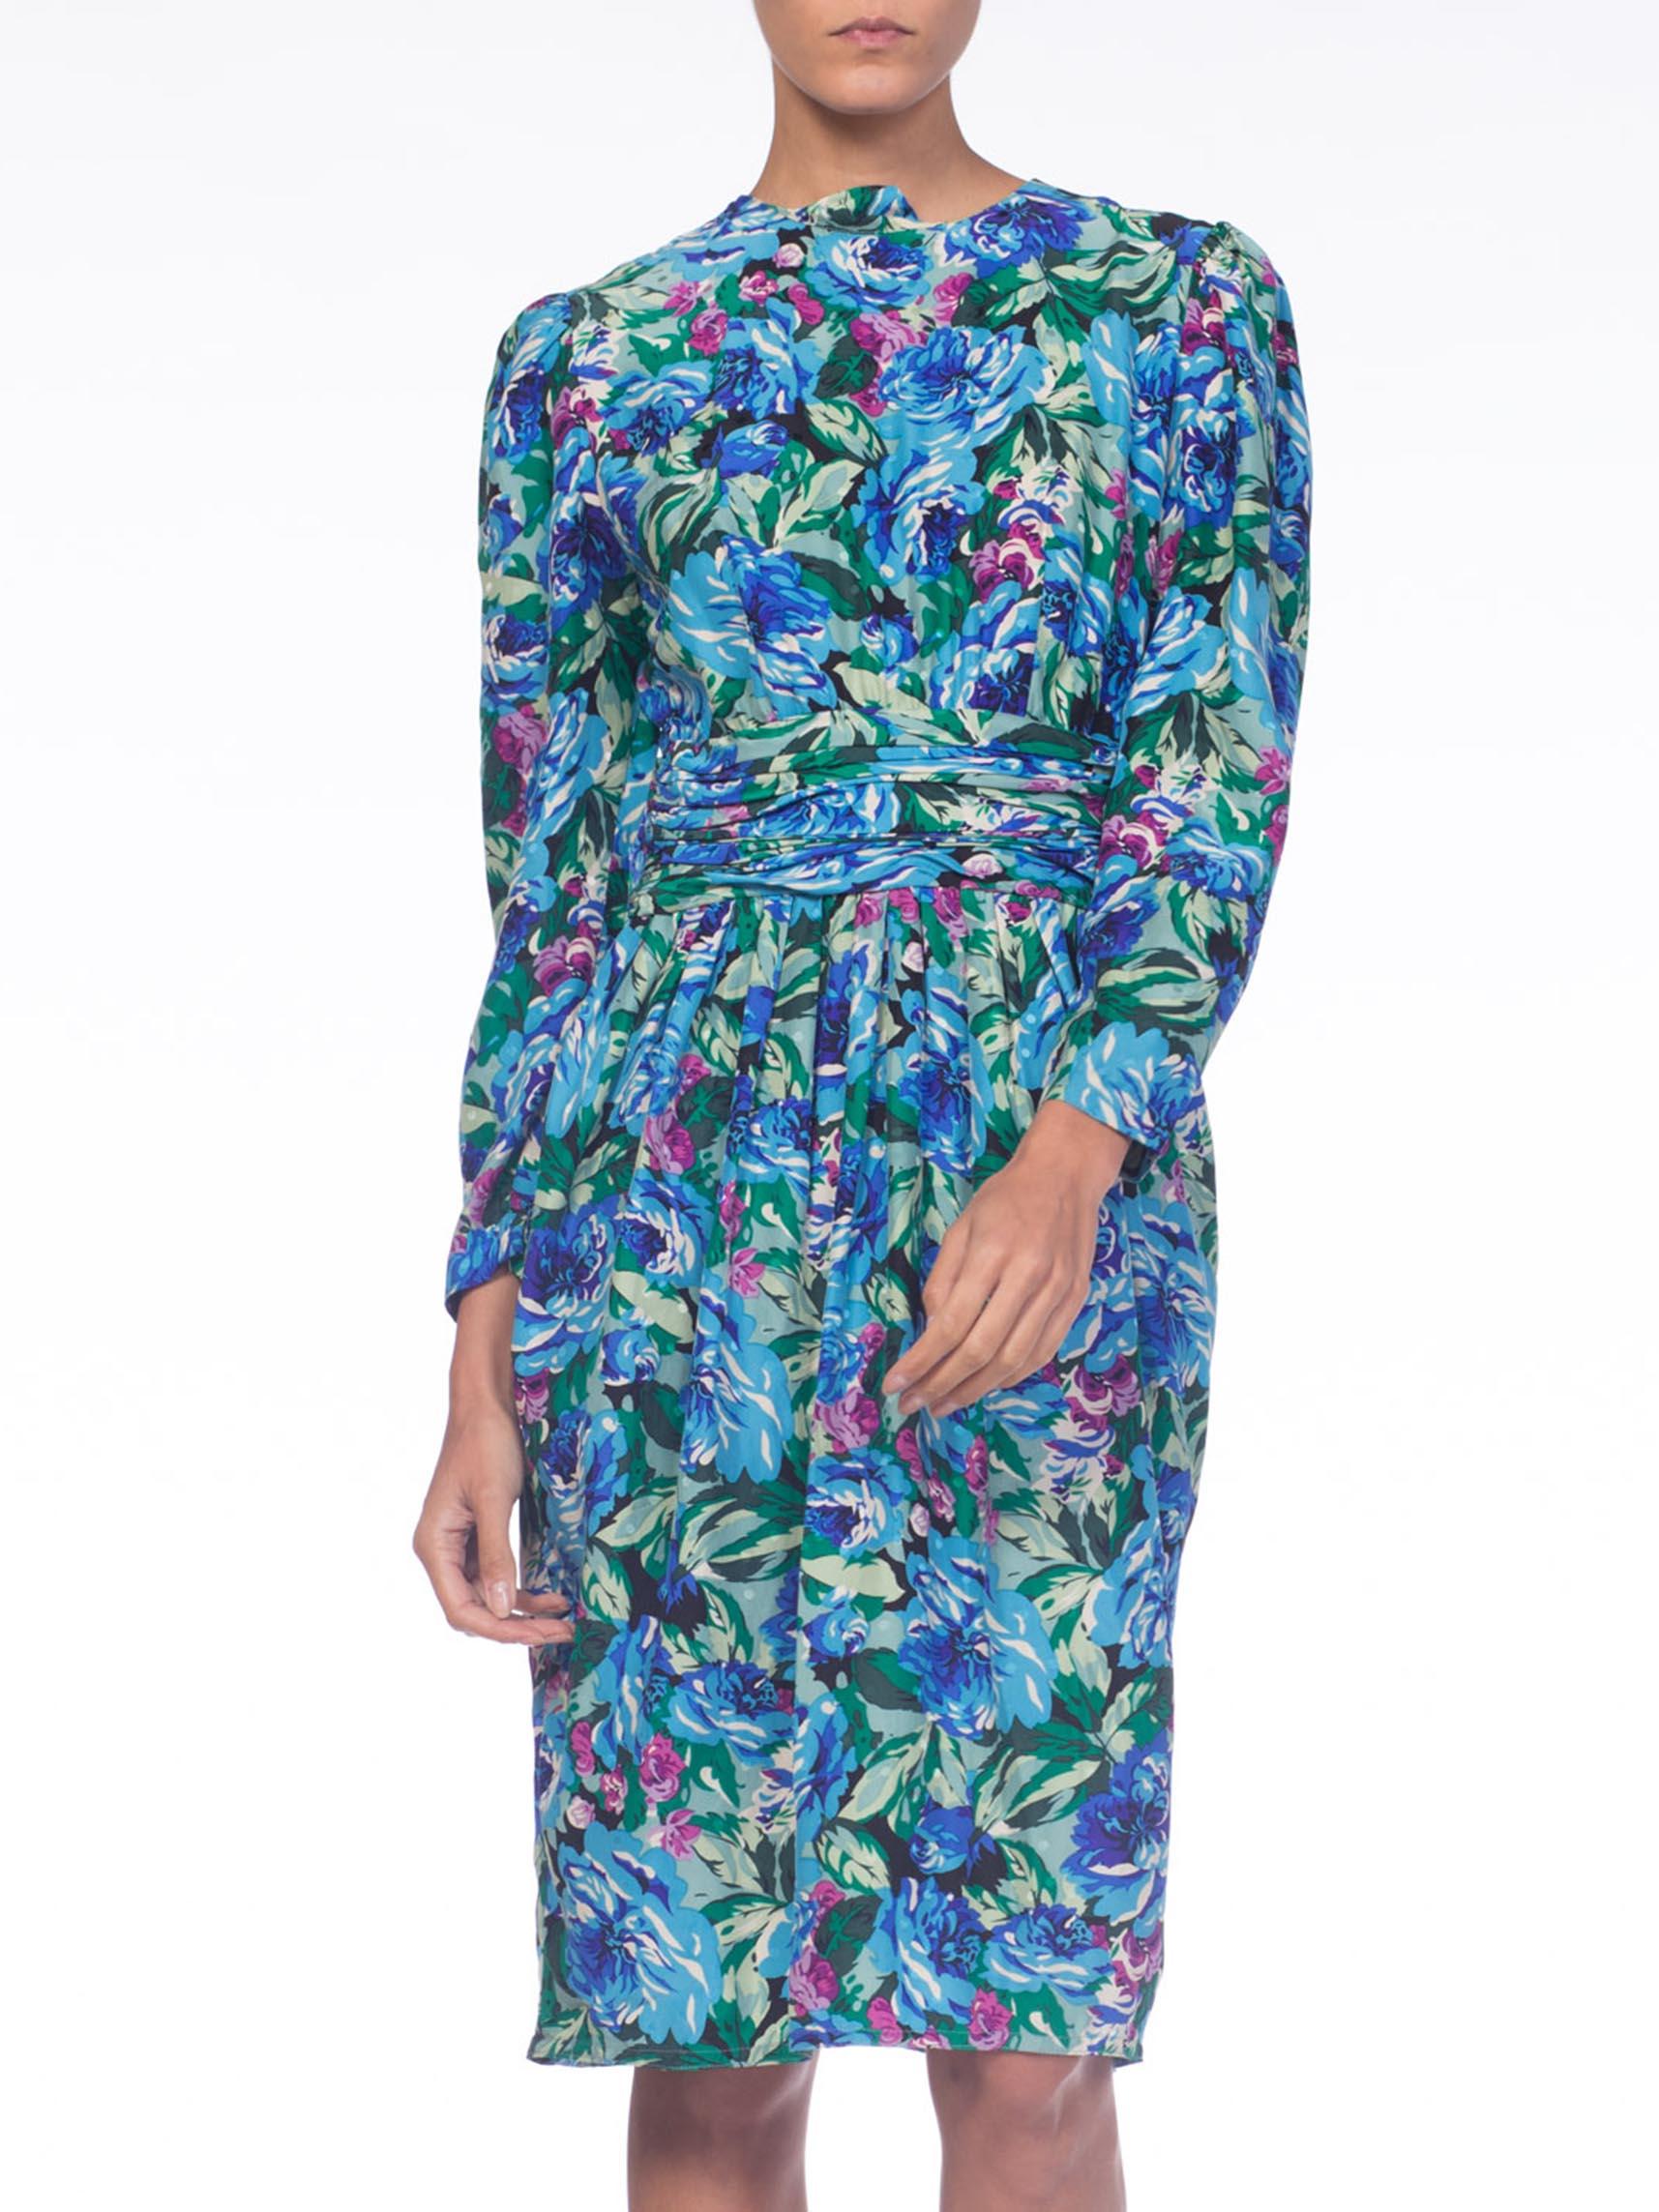 1980S EMANUEL UNGARO Style Blue Floral Silk Jacquard Long Sleeve Dress In Excellent Condition For Sale In New York, NY